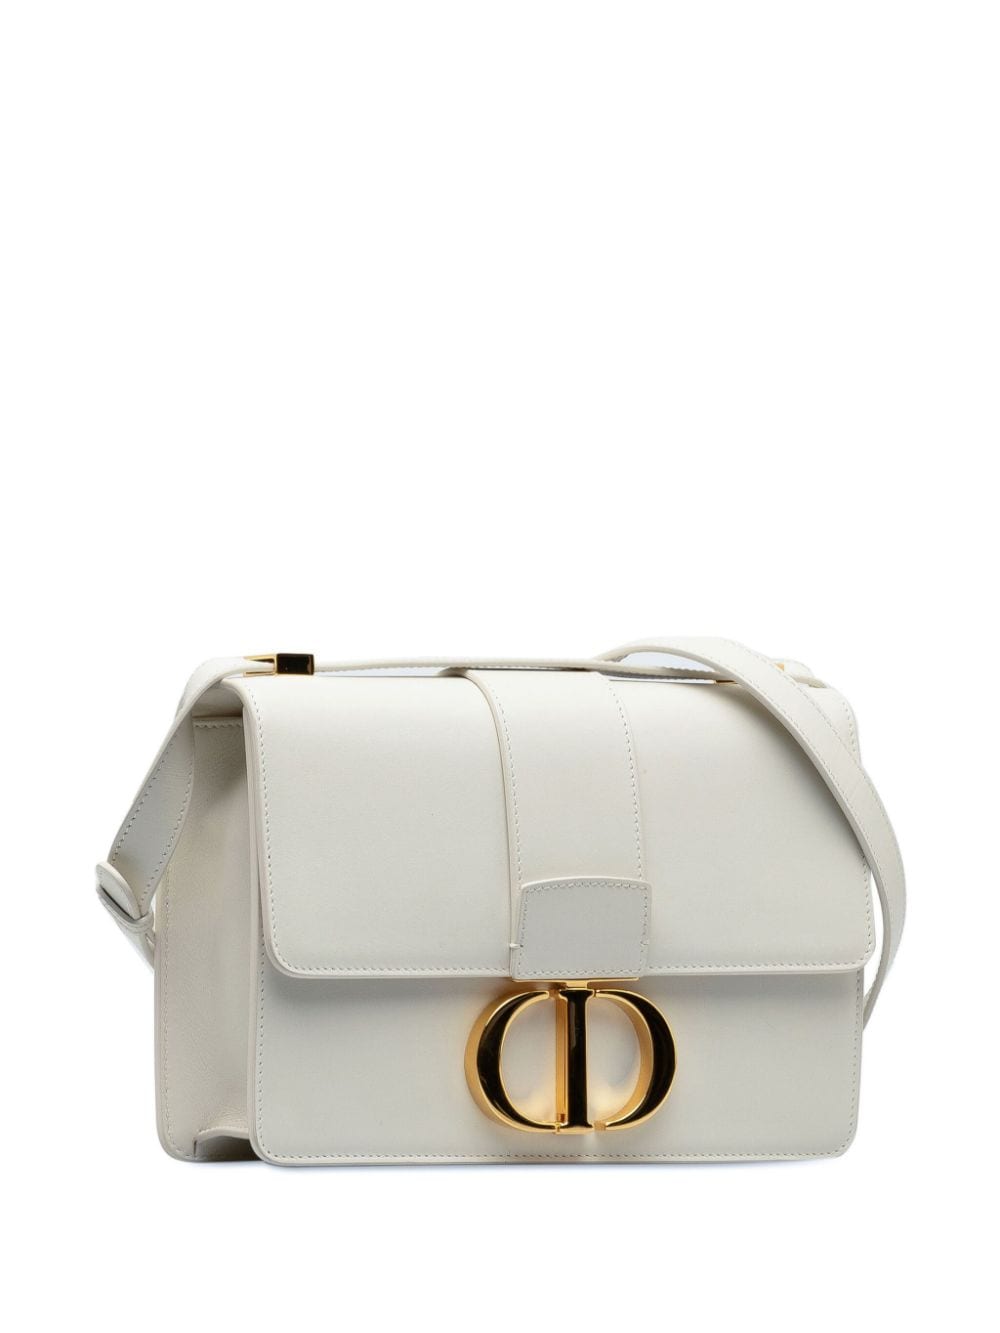 Pre-owned Dior 2021 30 Montaigne Shoulder Bag In White